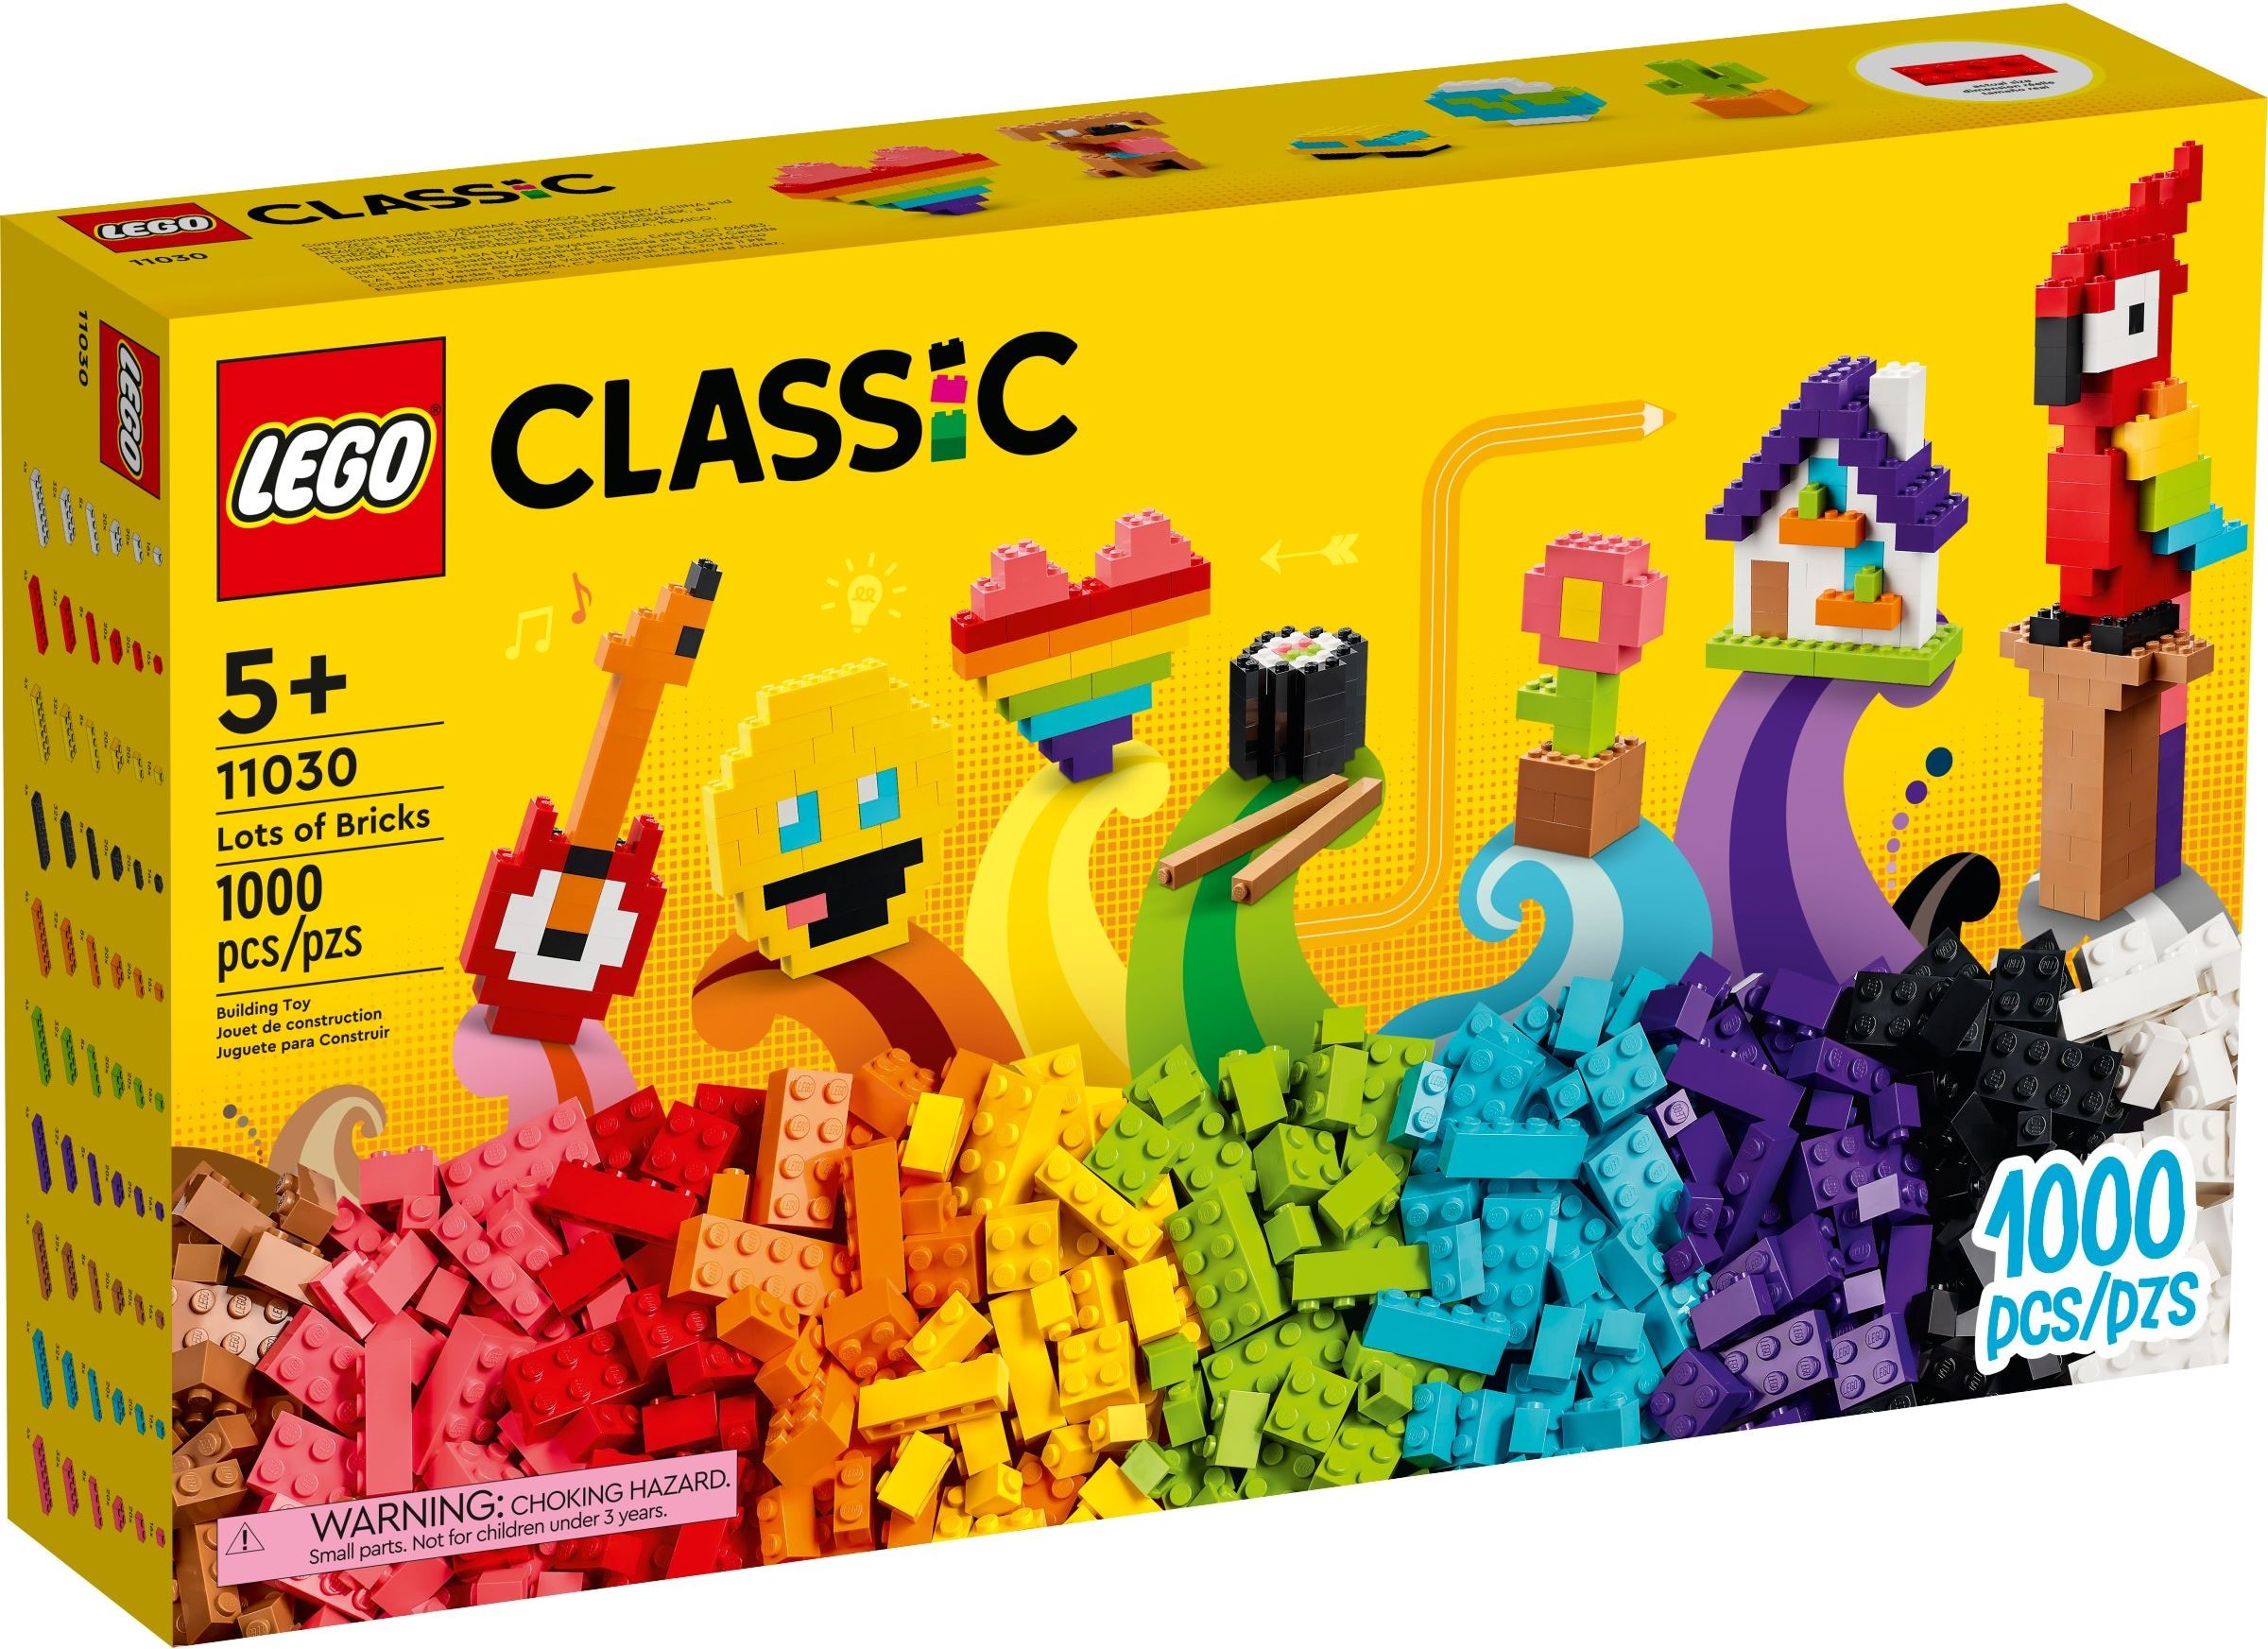 LEGO Classic Bricks Box (11717) Official Images - The Brick Fan